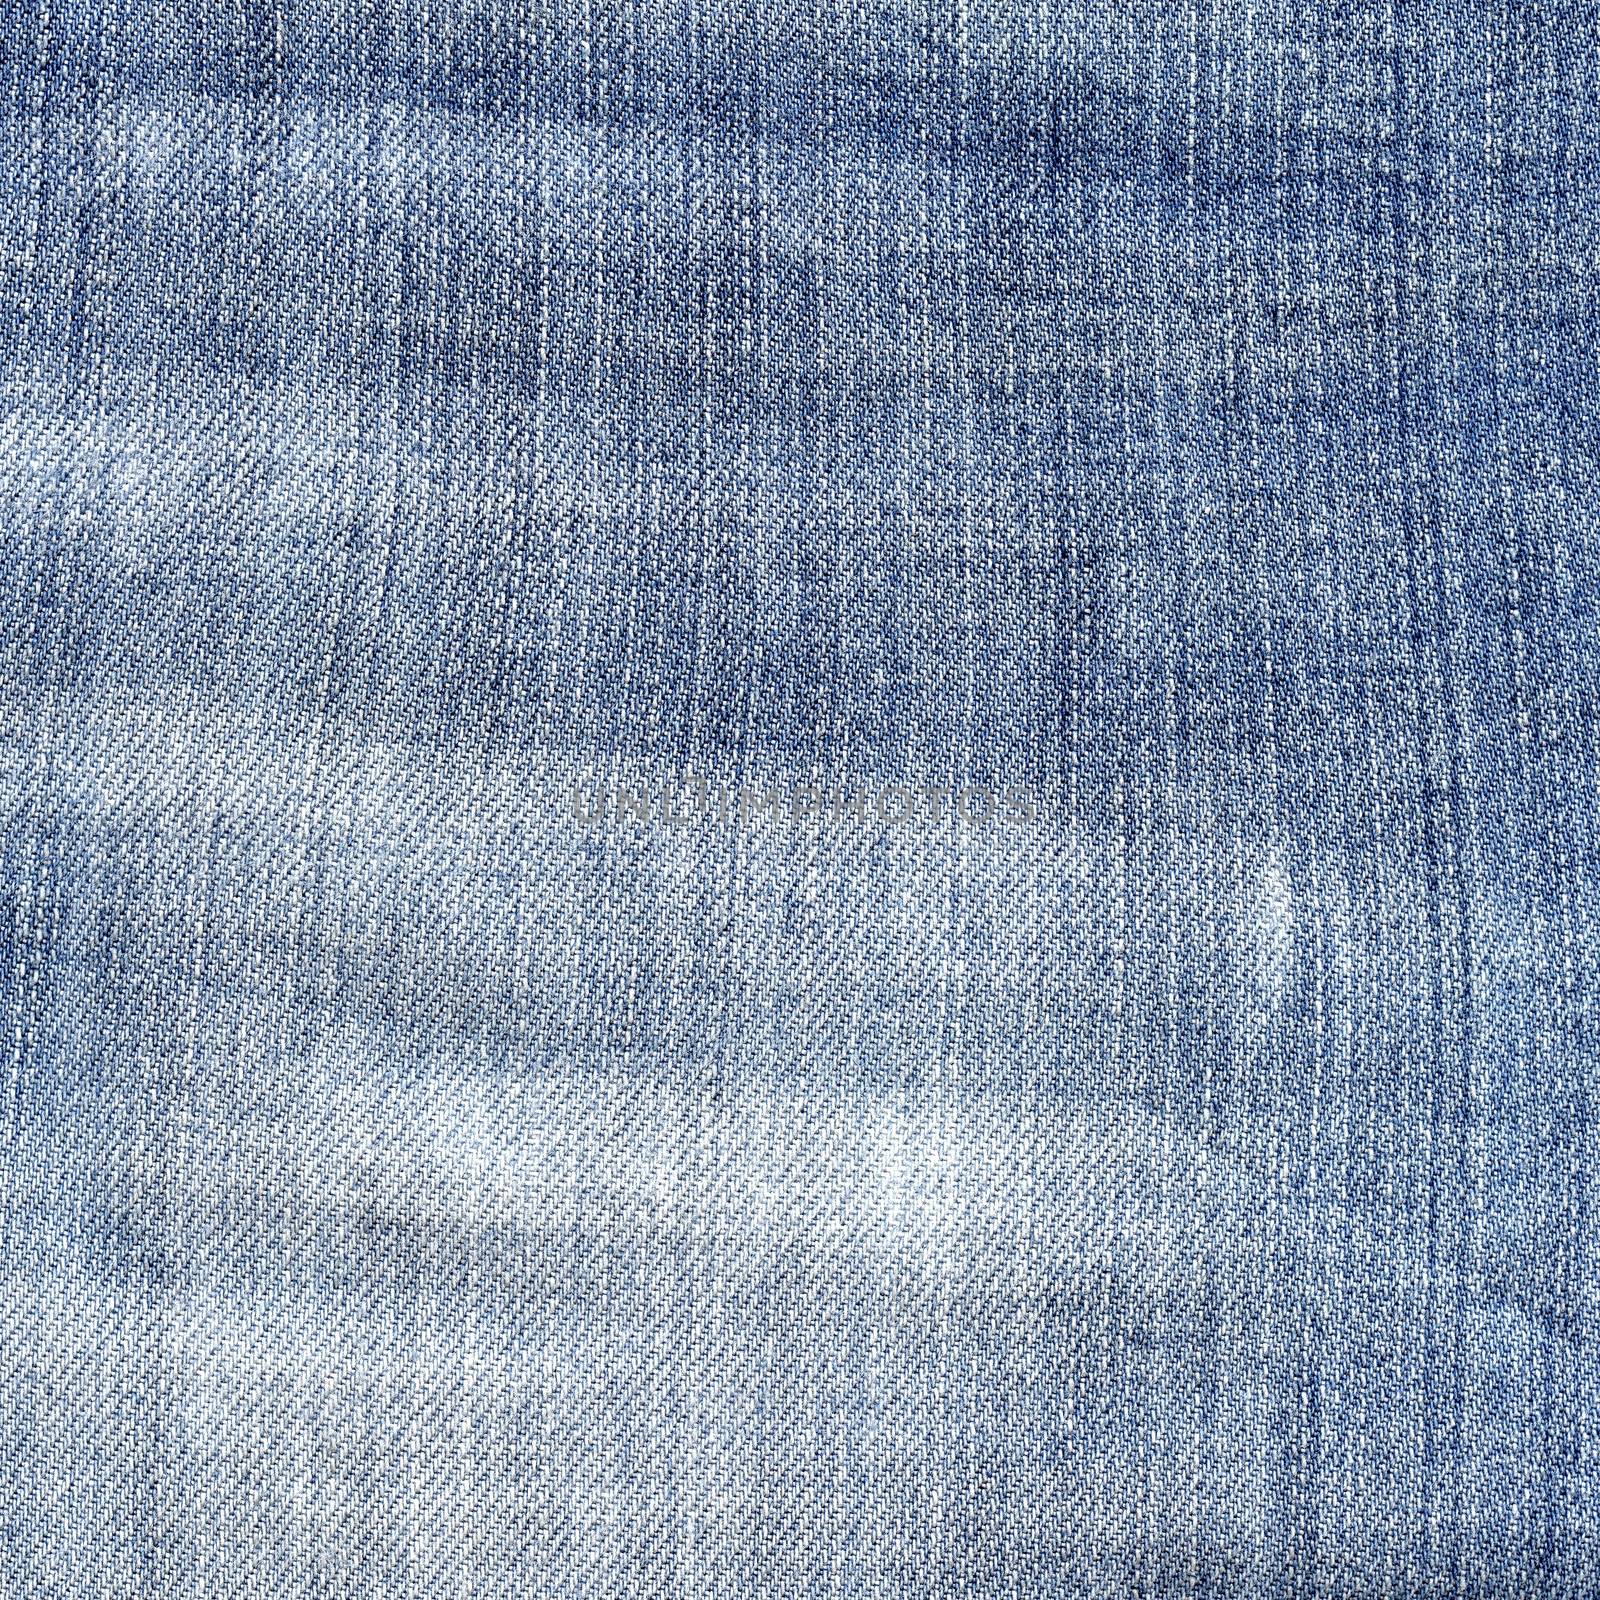 Shabby blue jeans texture. Light torn jeans